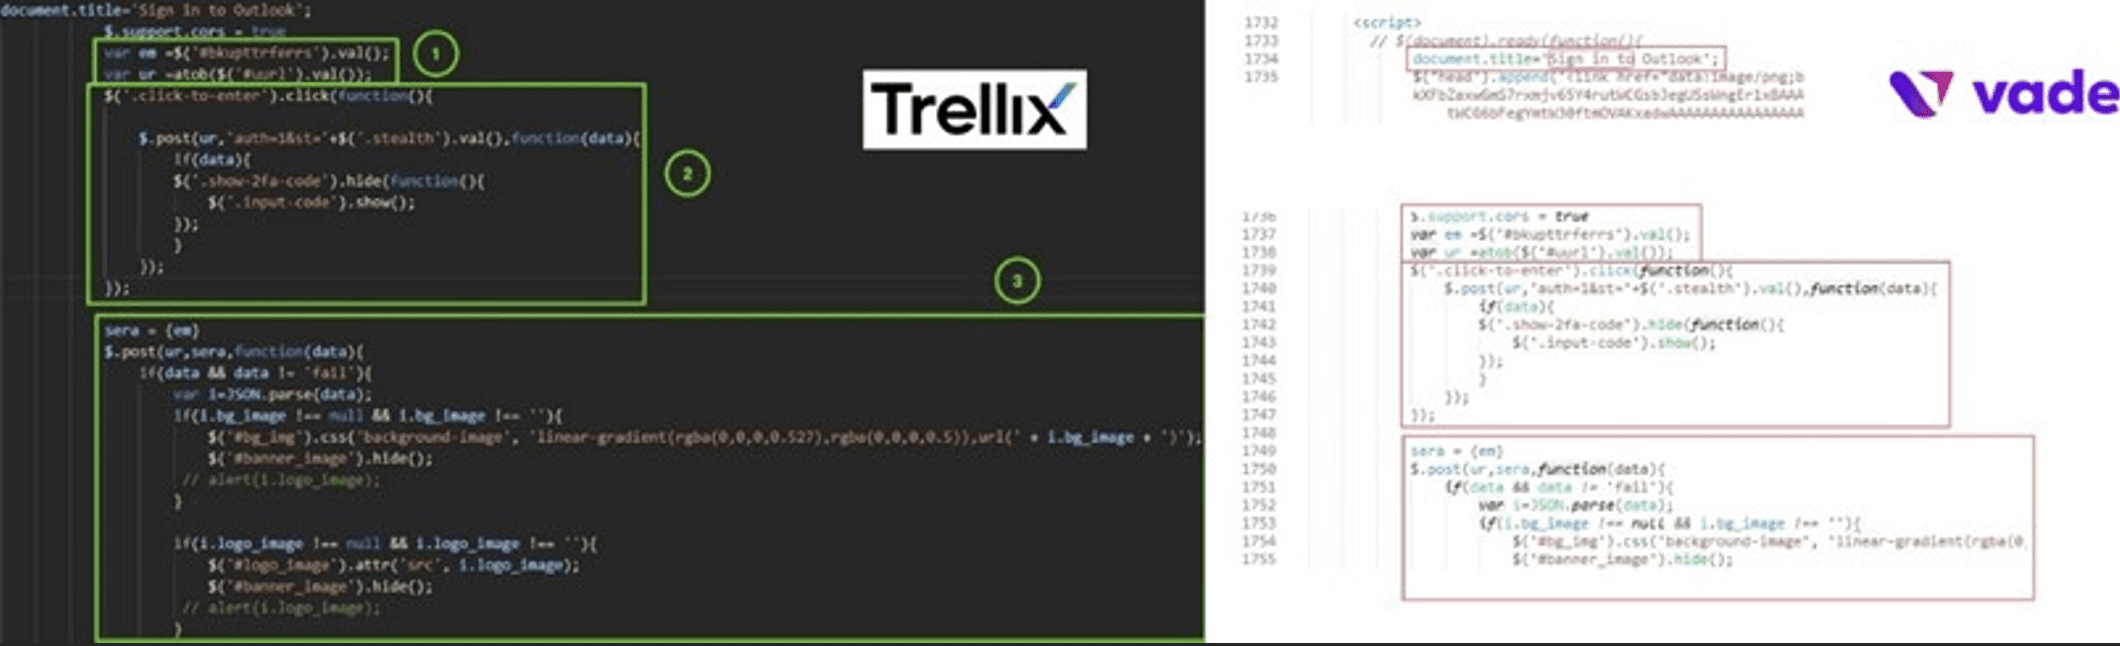 Quishing attacks – Code comparison between Trellix snippet and Vade snippet